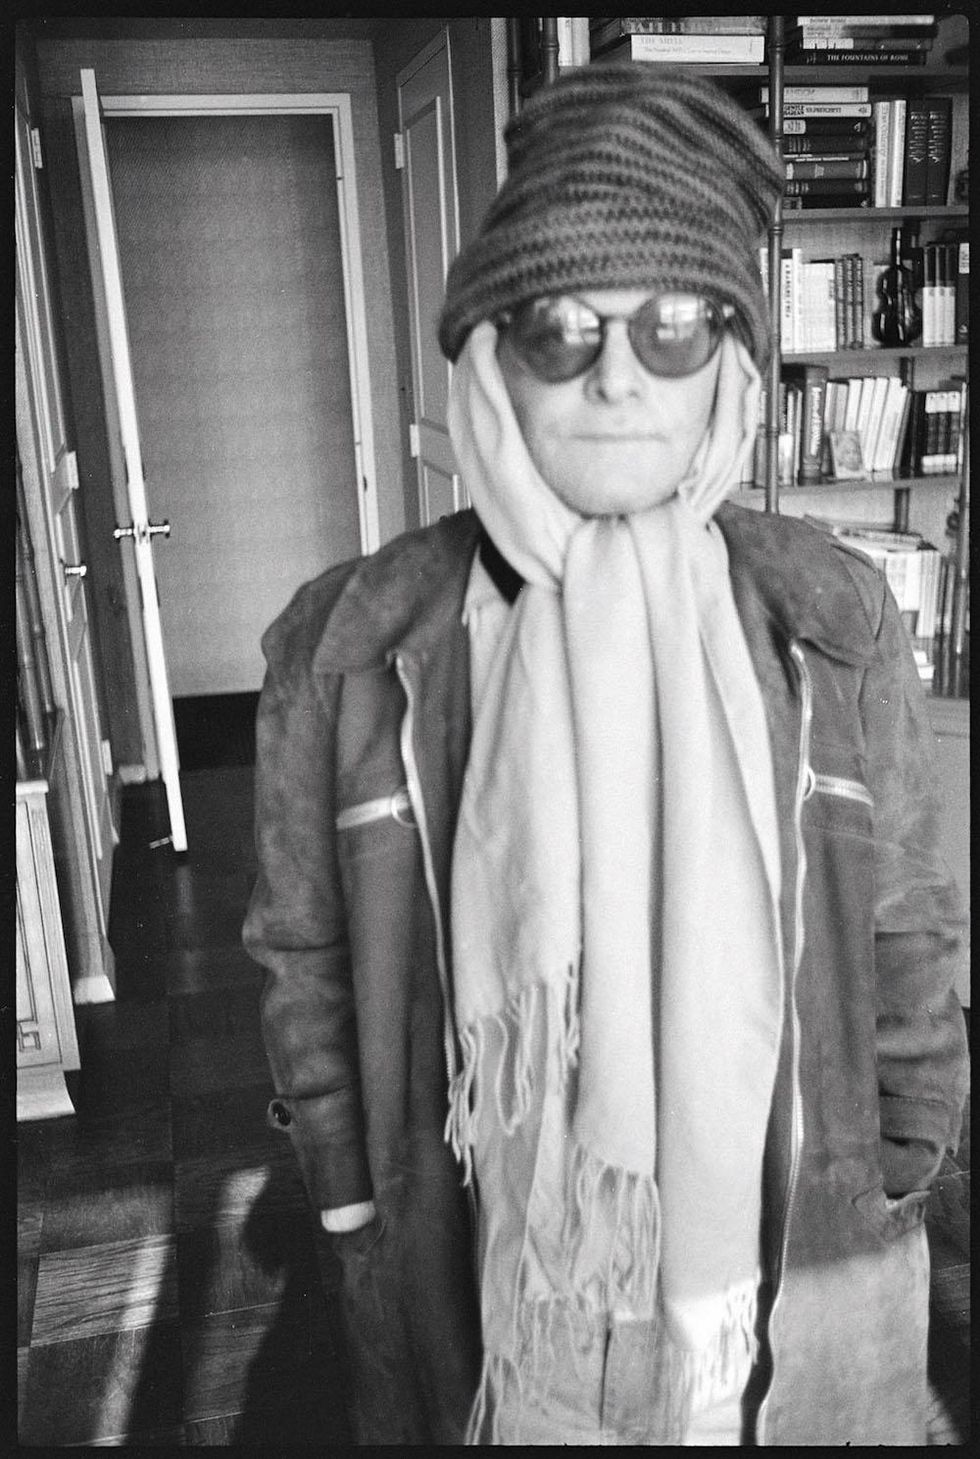 Truman Capote at this apartment in scarf and hat, 1979.